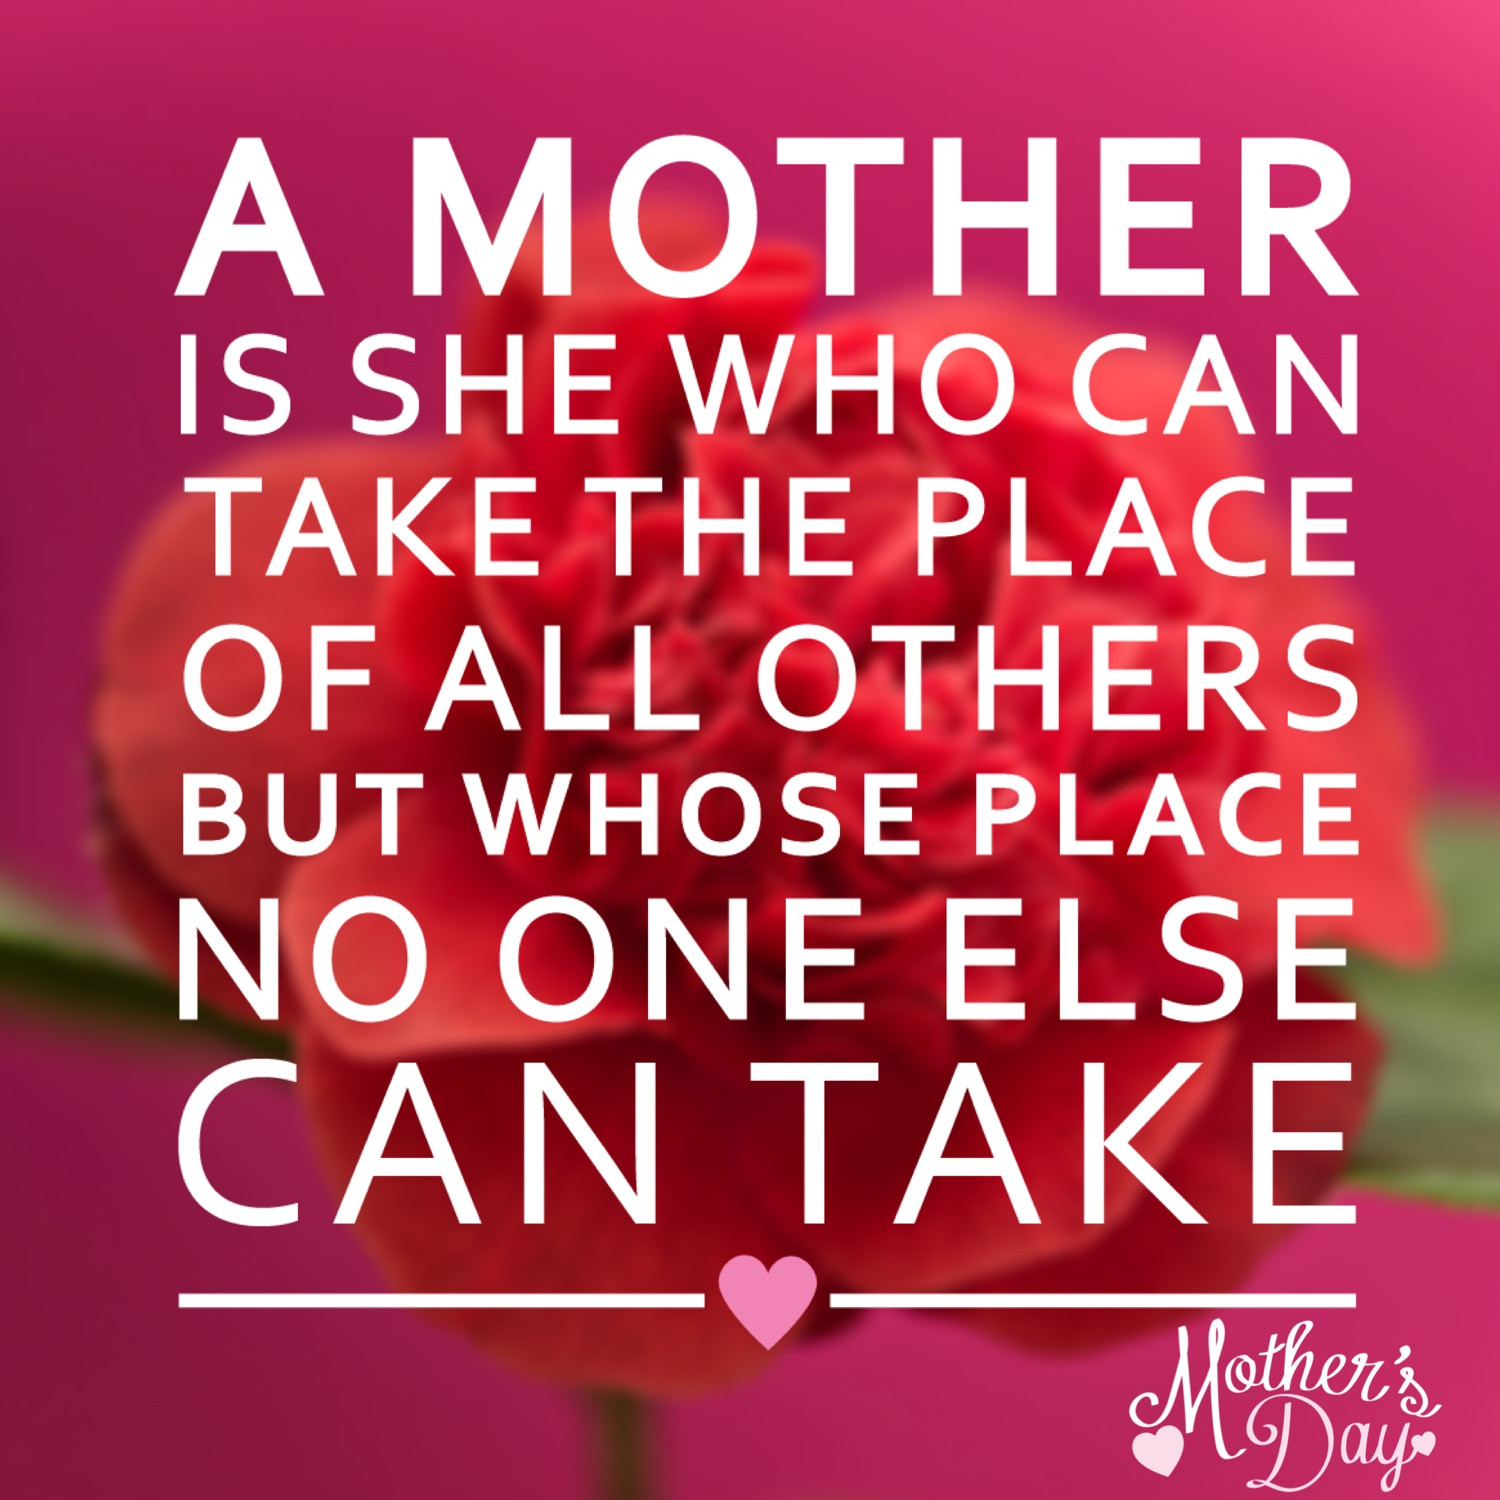 Quotes For Mothers
 10 FUN Things You Can Do With Mom Mother s Day Tech